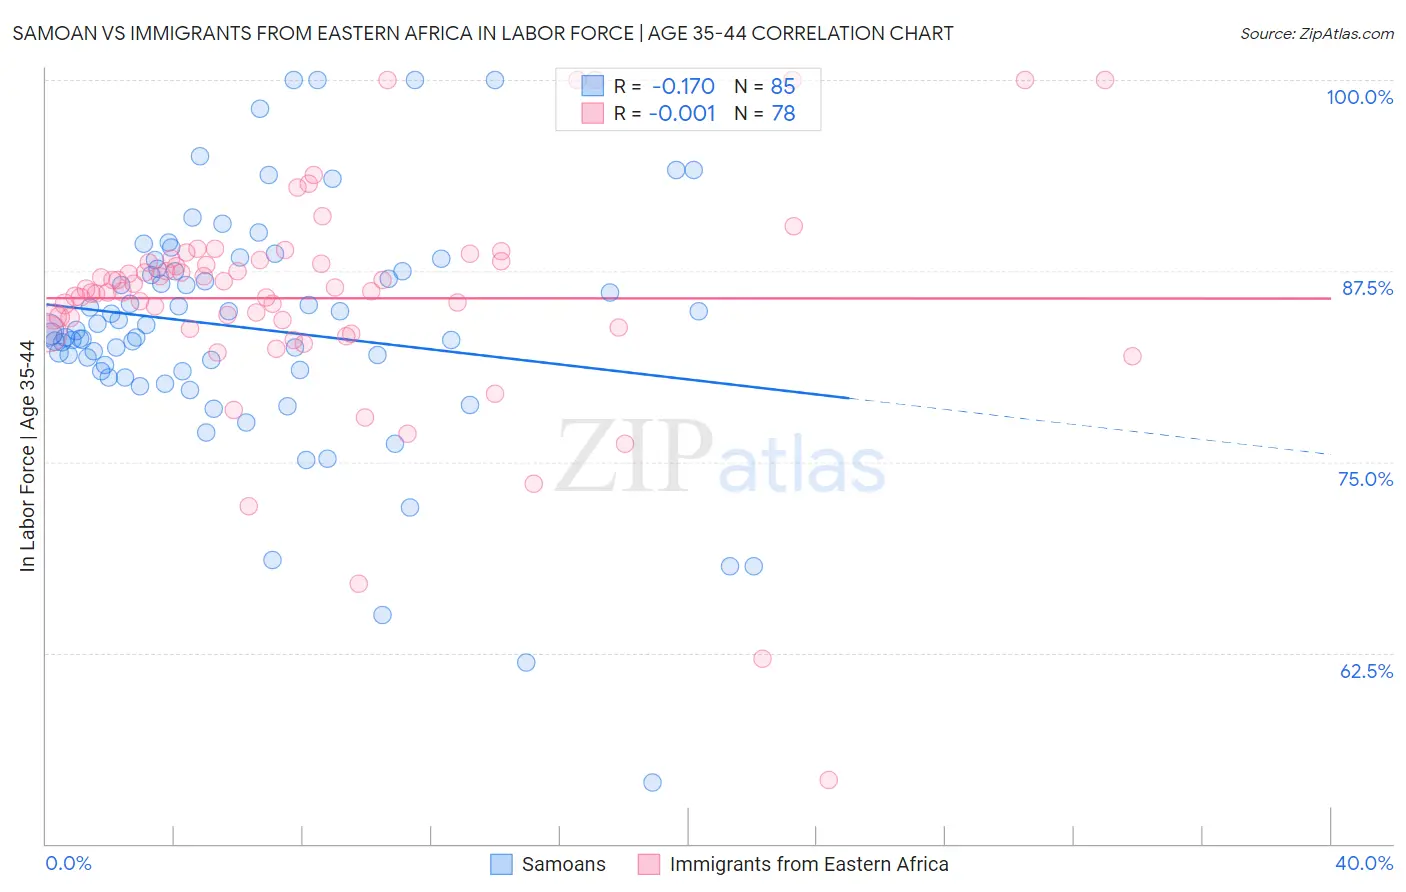 Samoan vs Immigrants from Eastern Africa In Labor Force | Age 35-44